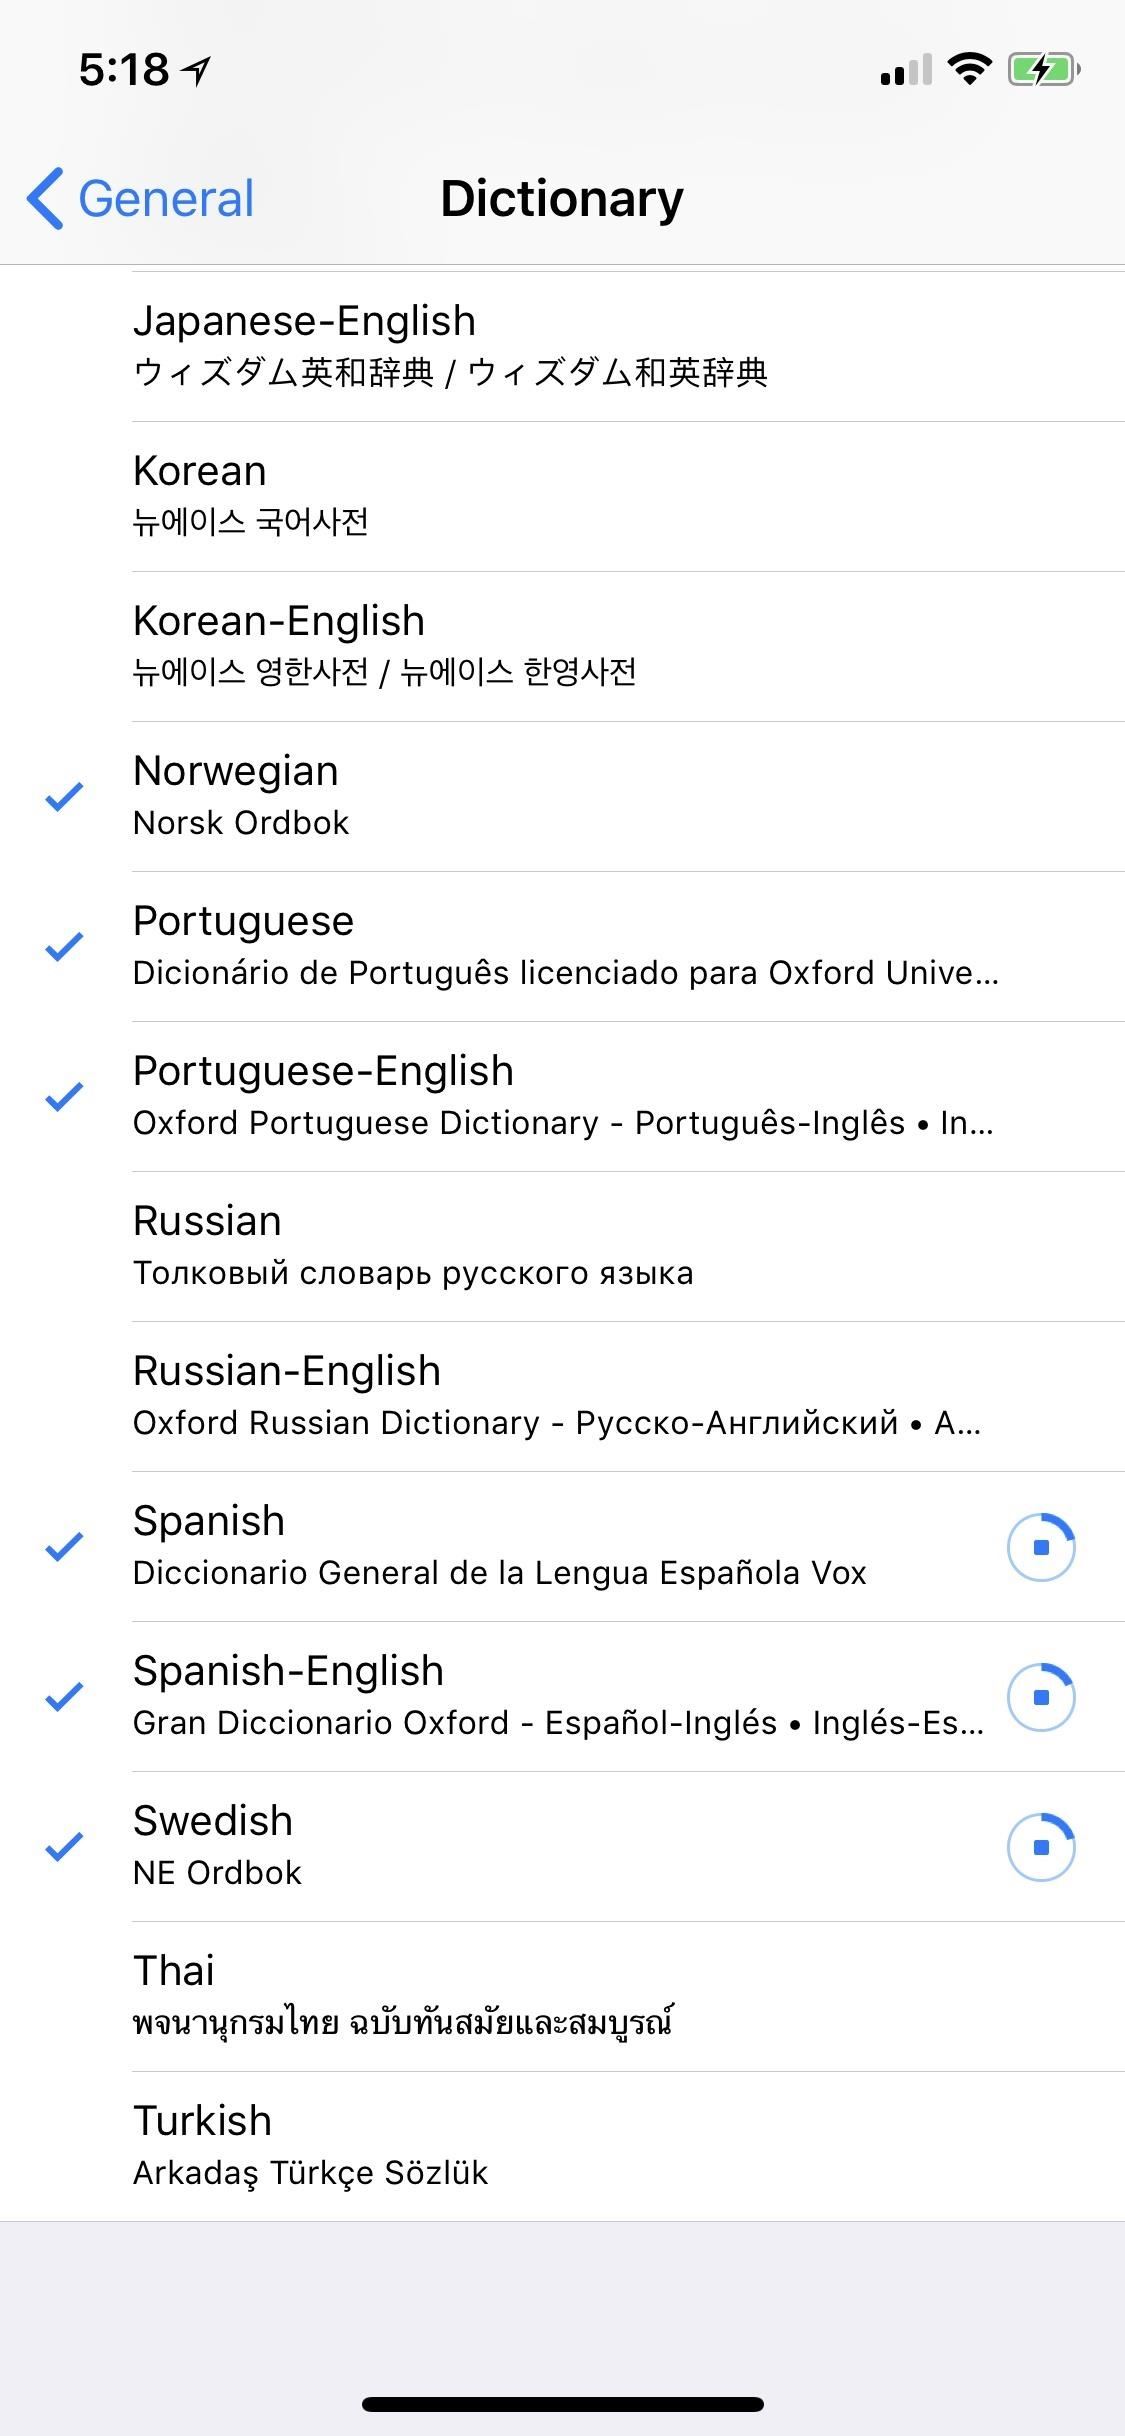 How to Add Foreign Language Dictionaries to Your iPhone to Look Up Definitions Faster